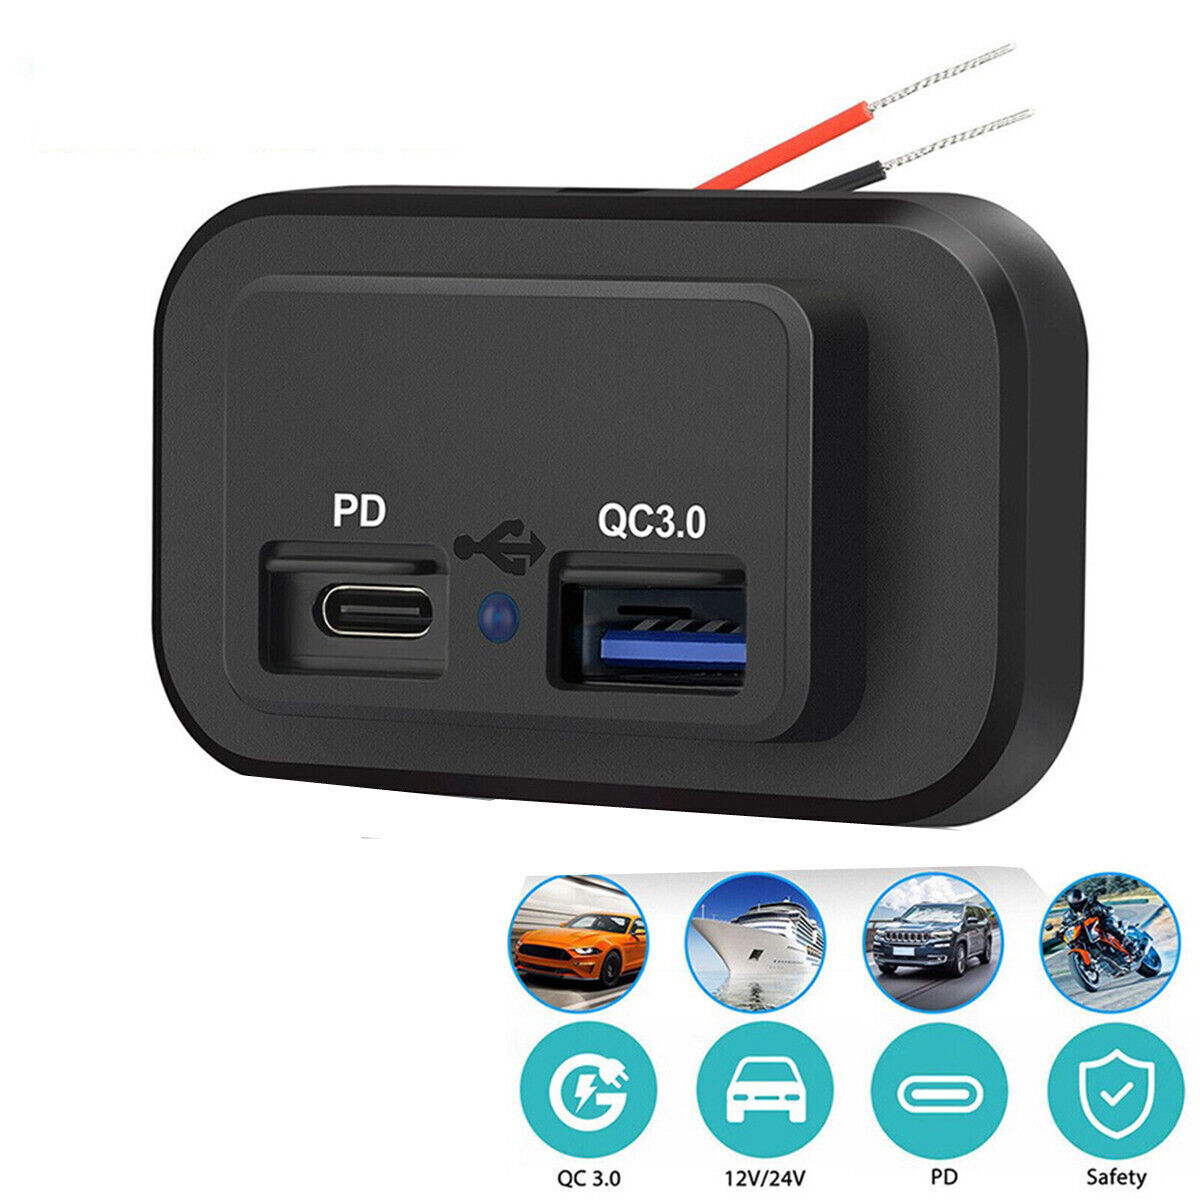 Dual Phone Fast Charger Adapter PD Type C USB QC 3.0 Port Car Truck Accessories